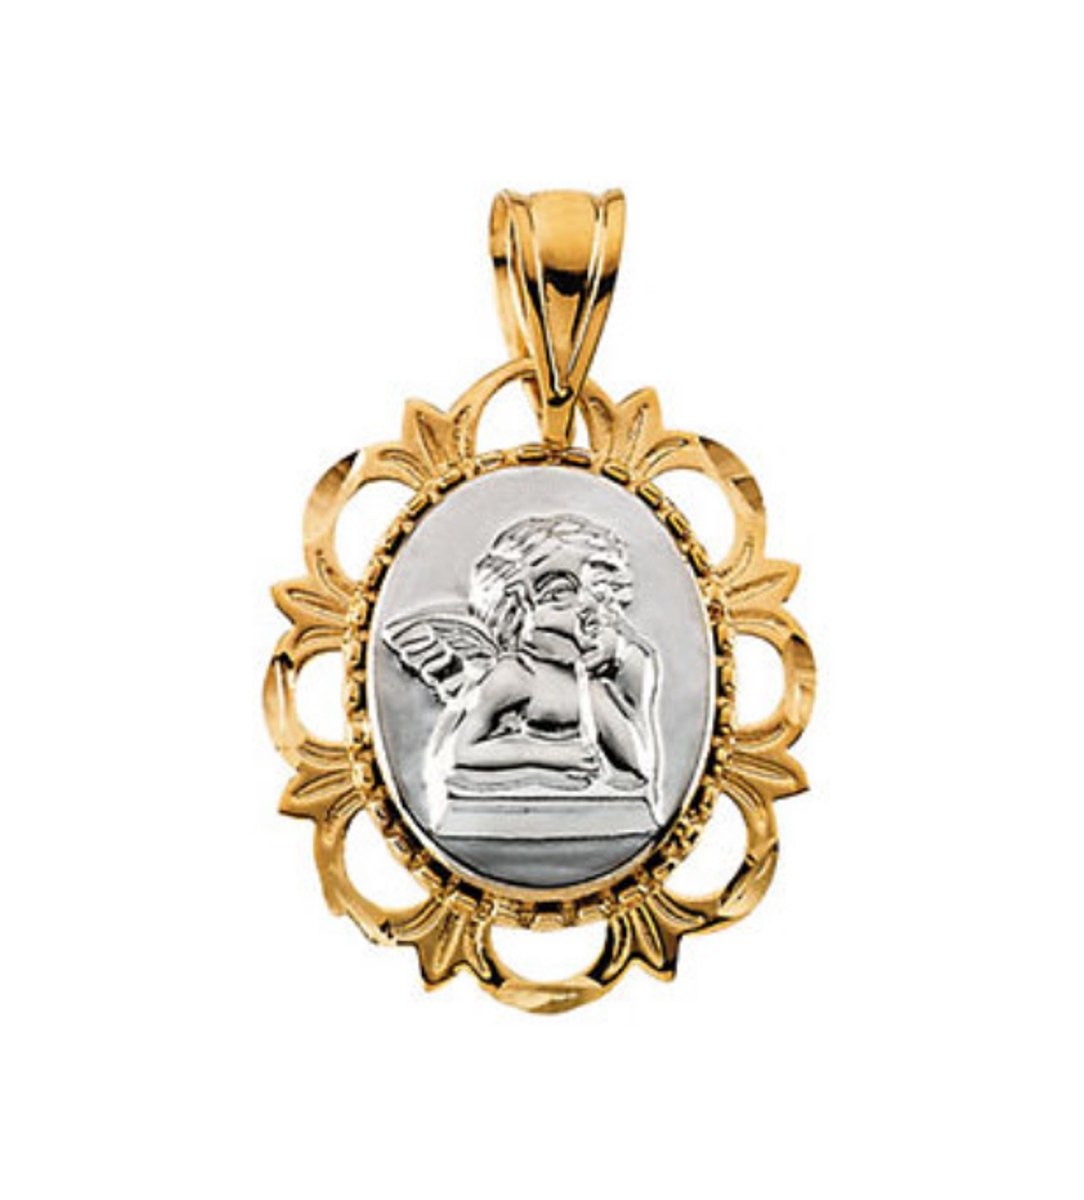 14k White and Yellow Gold Raphael Medal Pendant (19.25x16 MM).